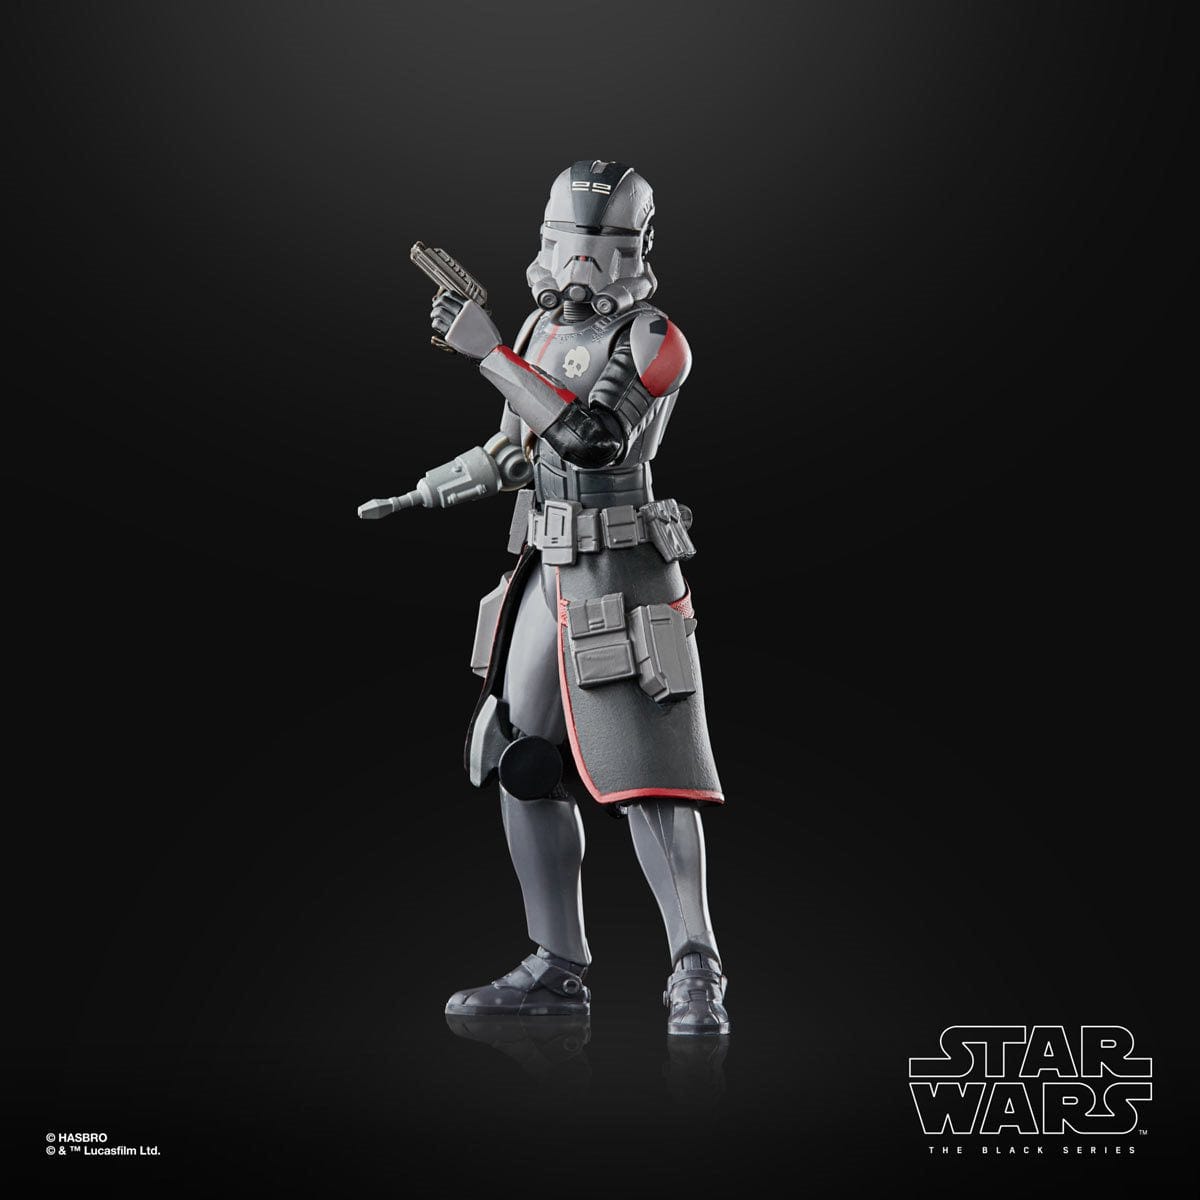 Star Wars The Black Series Echo 6-Inch Action Figure